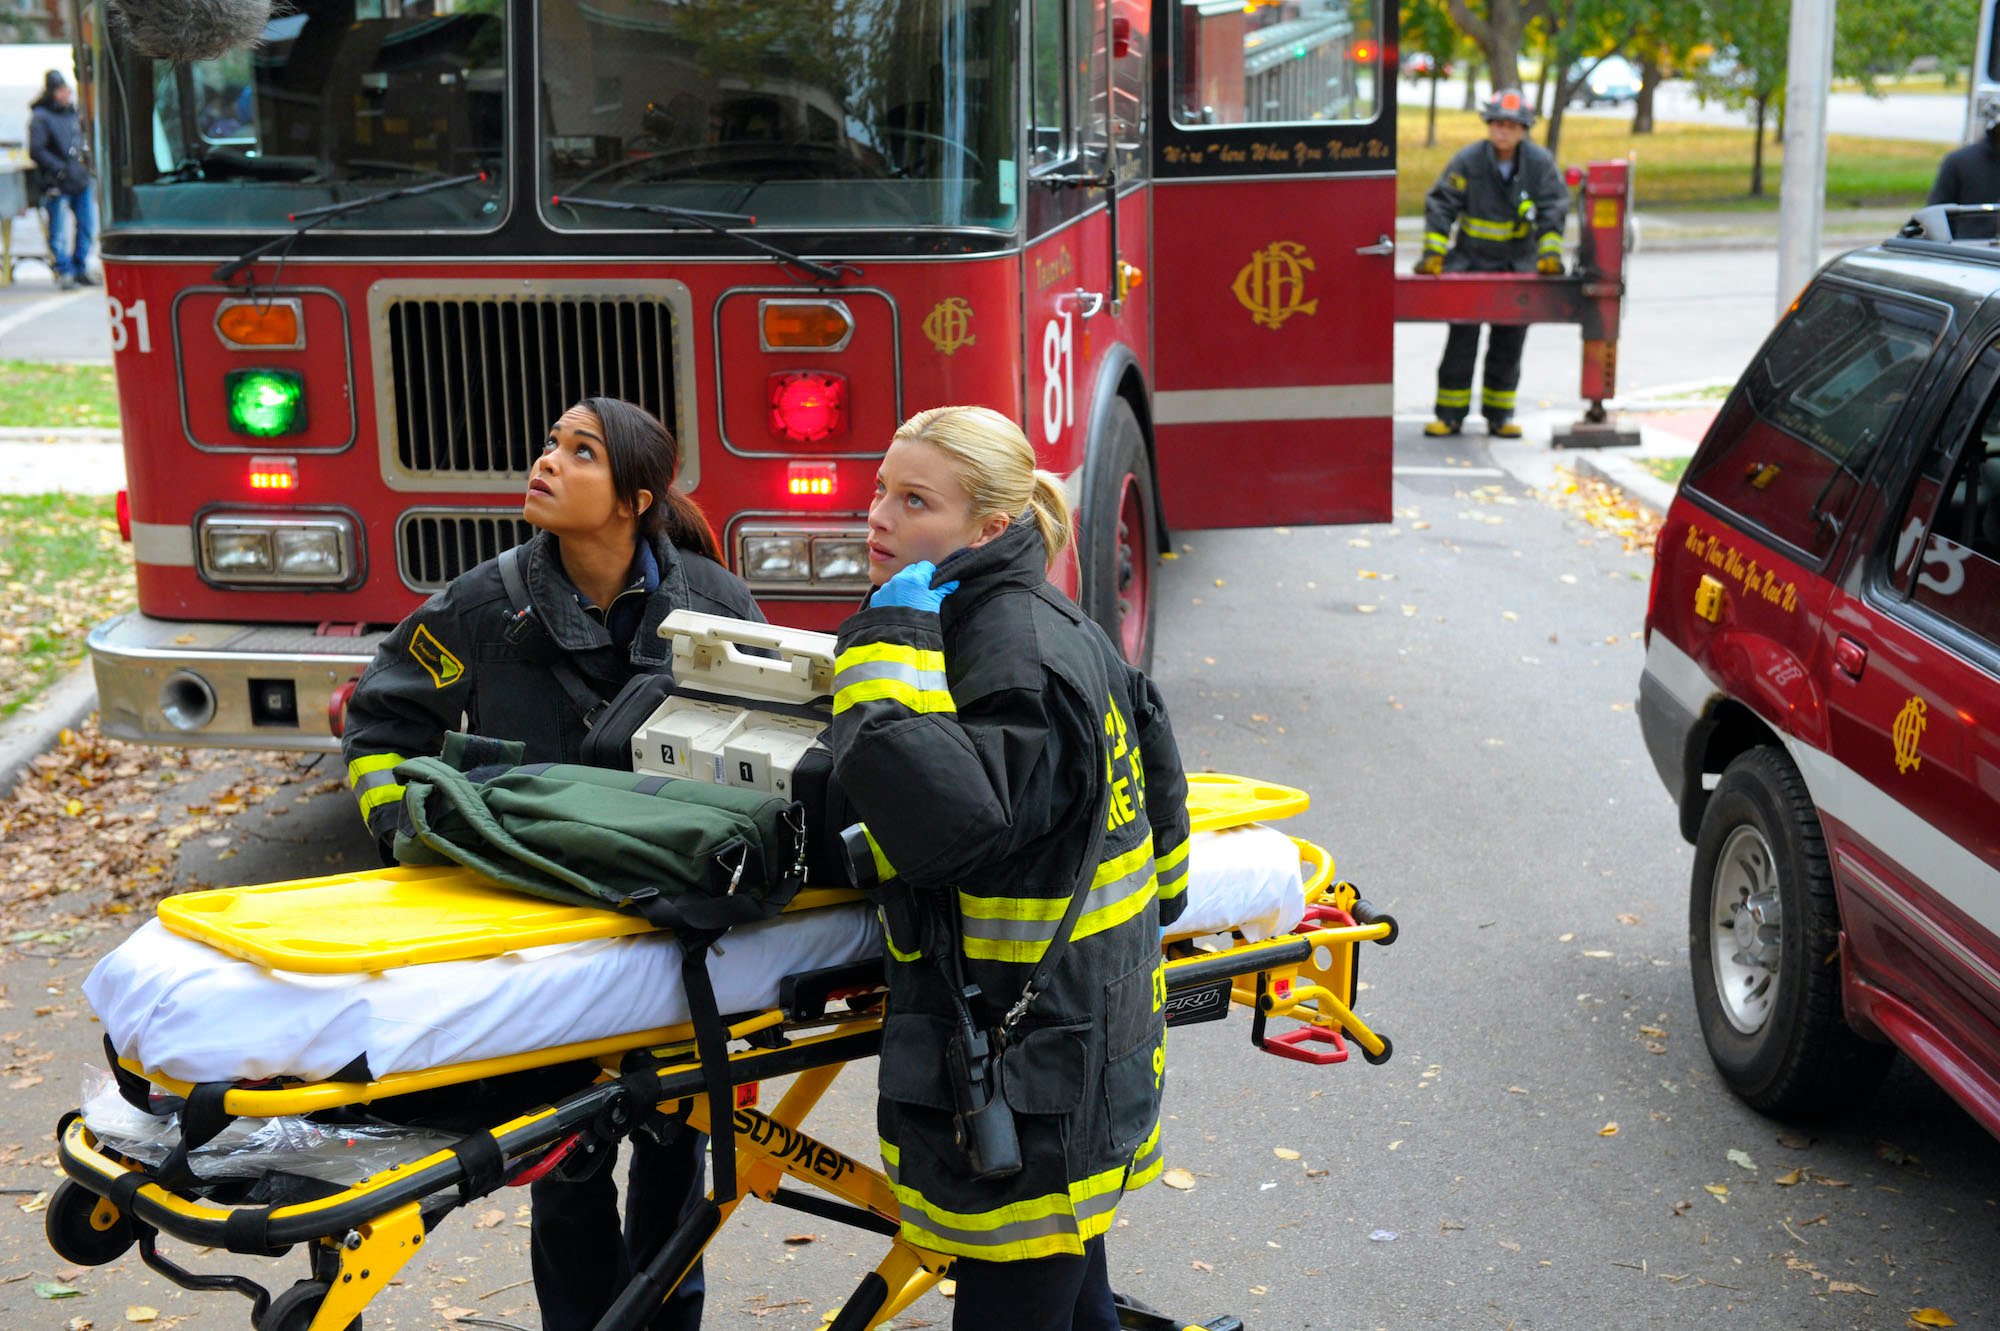 does shay die in season 2 chicago fire